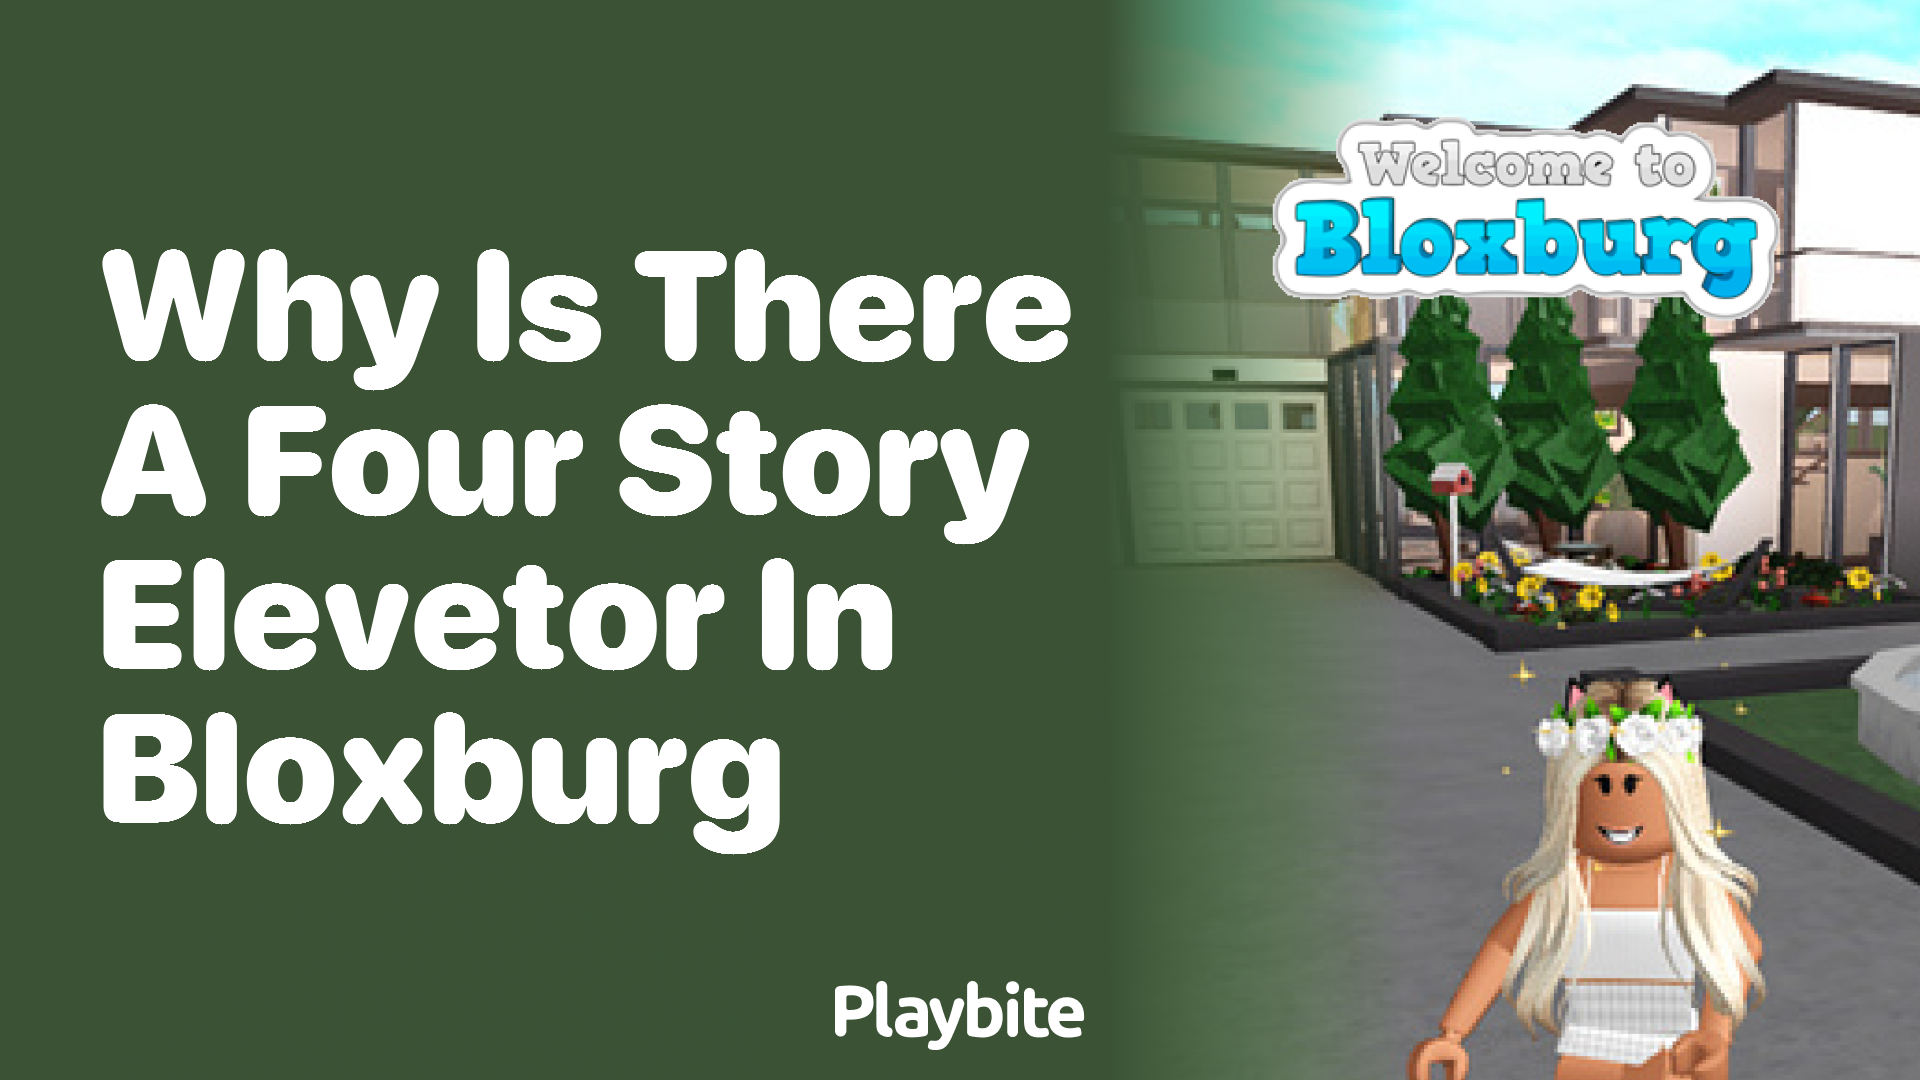 Why Is There a Four-Story Elevator in Bloxburg?